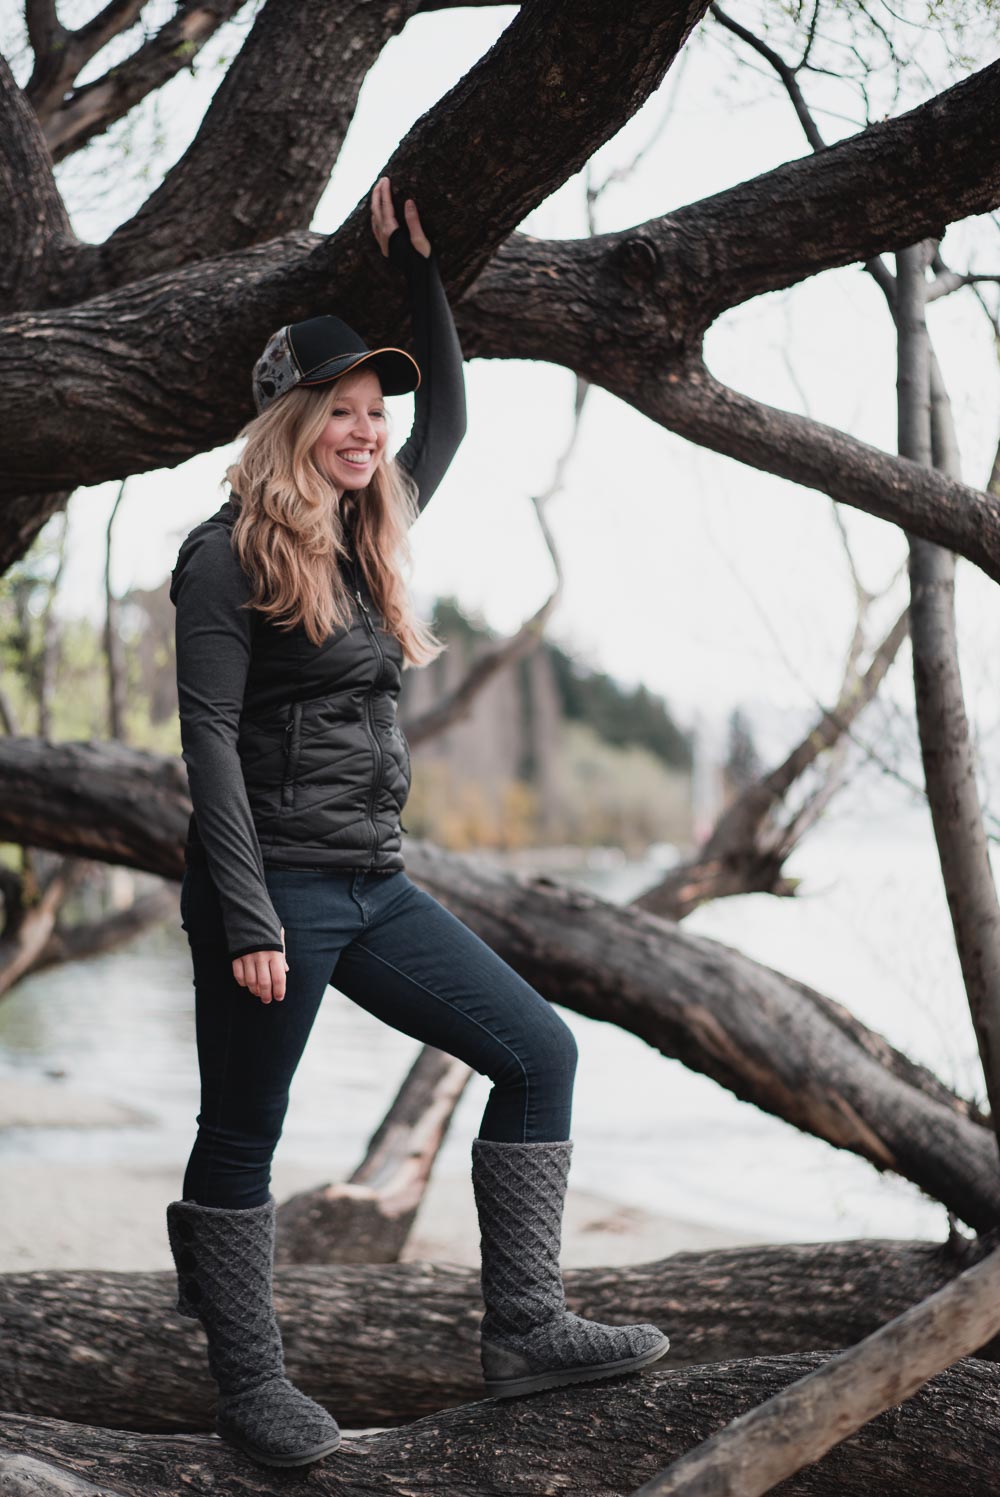 Cozy and Cute Camping Outfit on Stylish Travel Girl: Prana hat, North Face reversible vest, ICEWEAR top, GAP jeans, UGG Classic Cardy boots